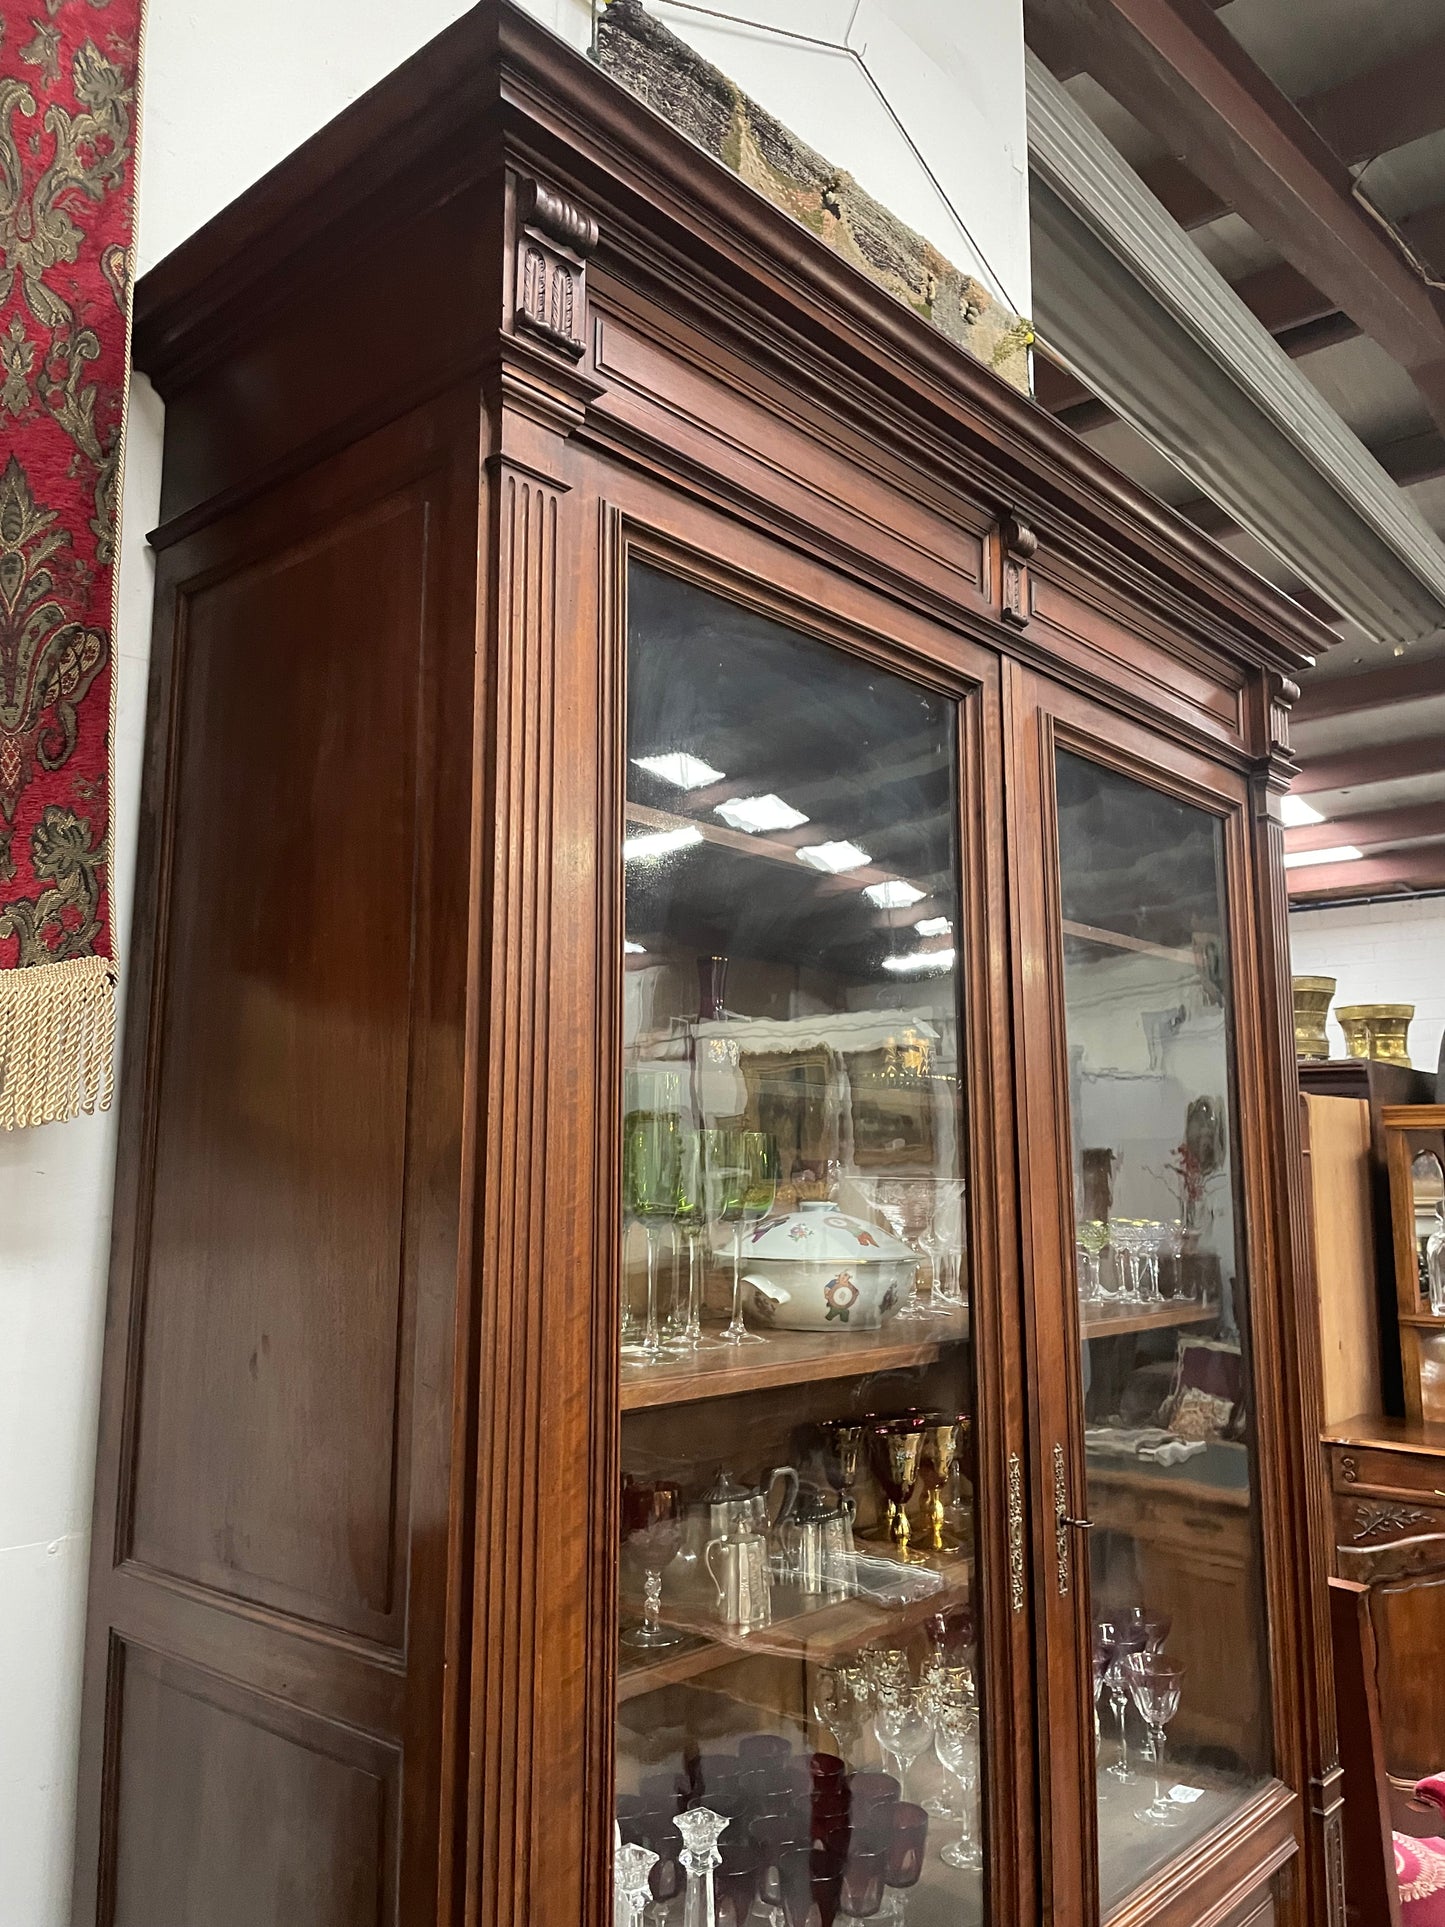 Grand French Walnut Louis XVI Style Two Door Bookcase